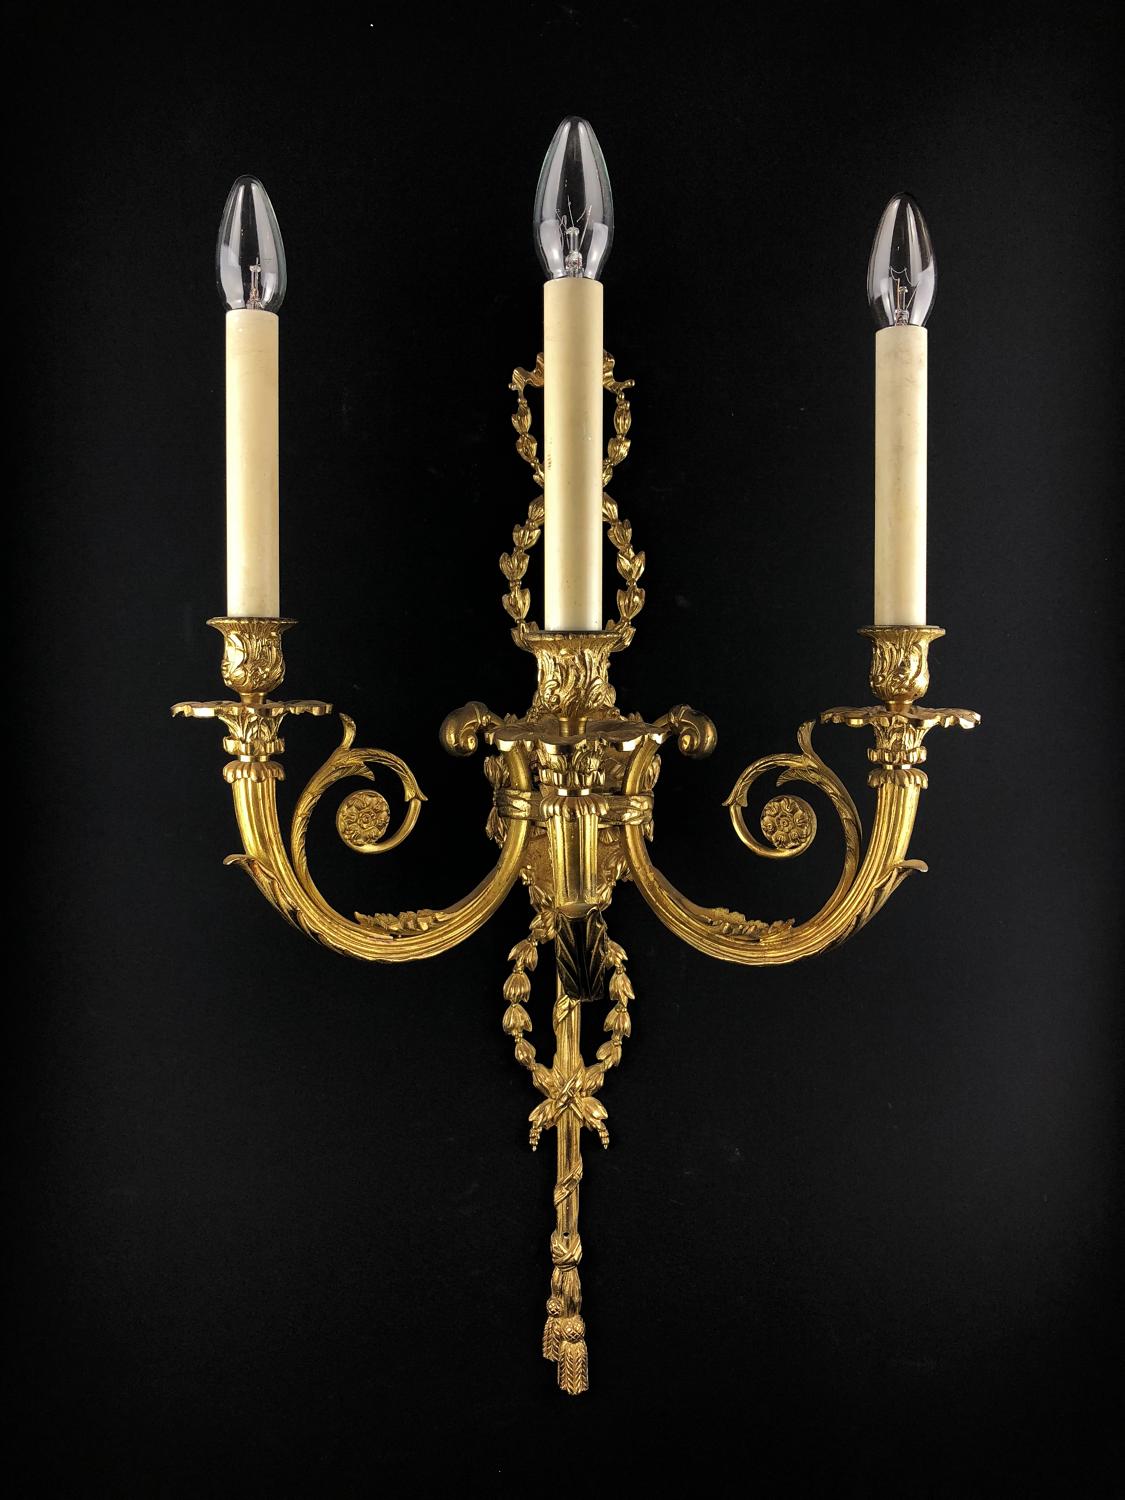 A large 3 arm Louis XVI style wall light